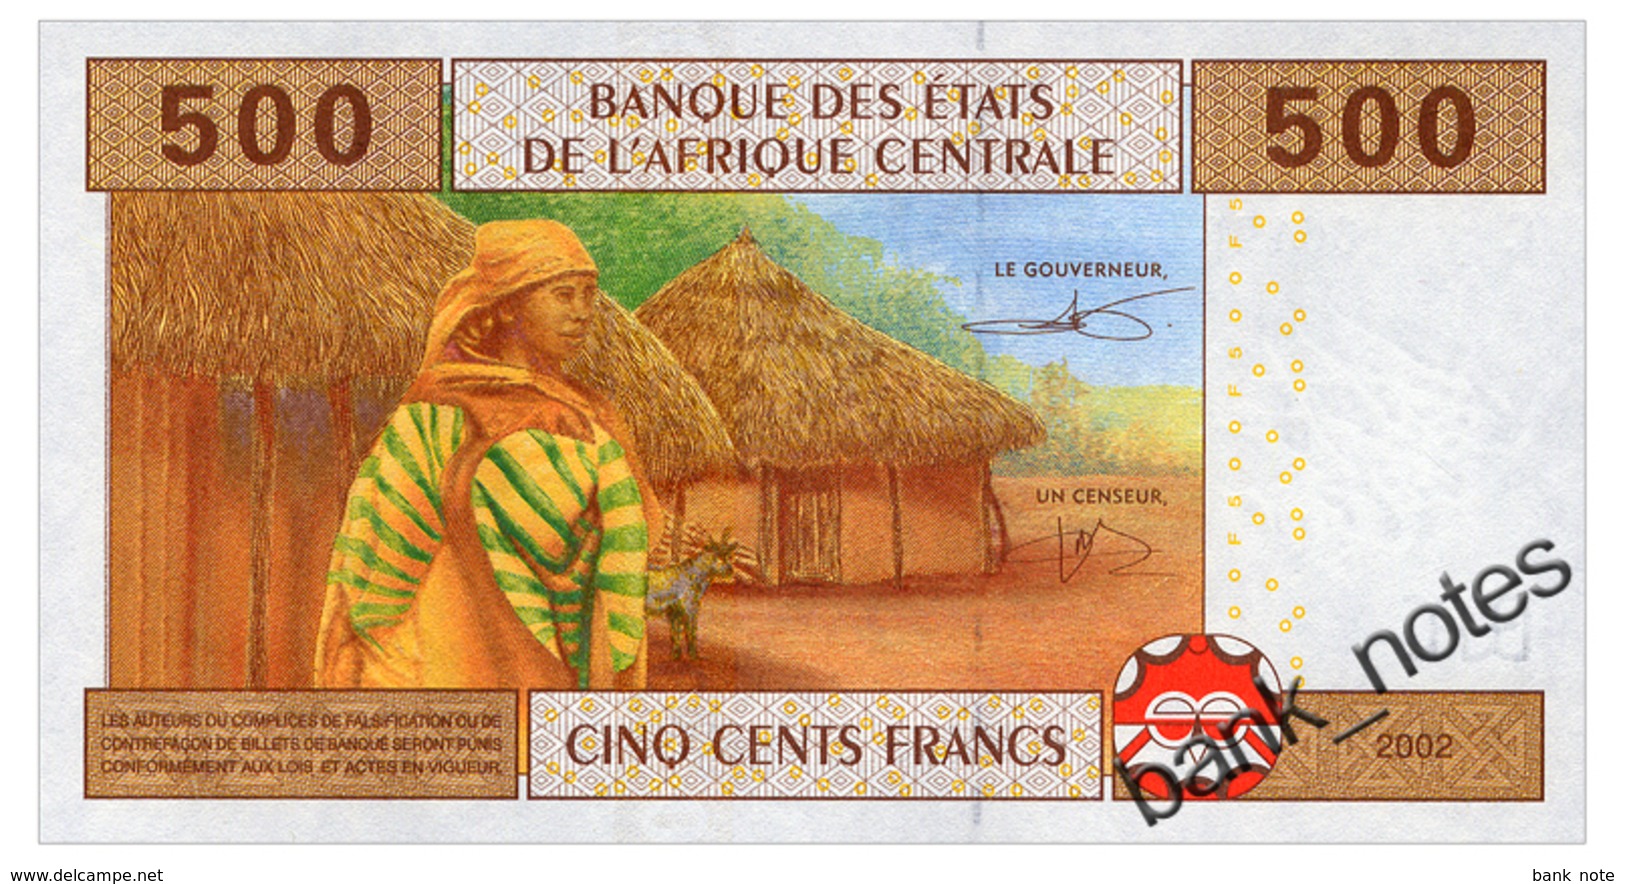 CENTRAL AFRICAN STATES 500 FRANCS 2016 CHAD ABAGA-NCHAMA - LOUIS ALEKA-RYBERT Pick 606Cc Unc - Centraal-Afrikaanse Staten